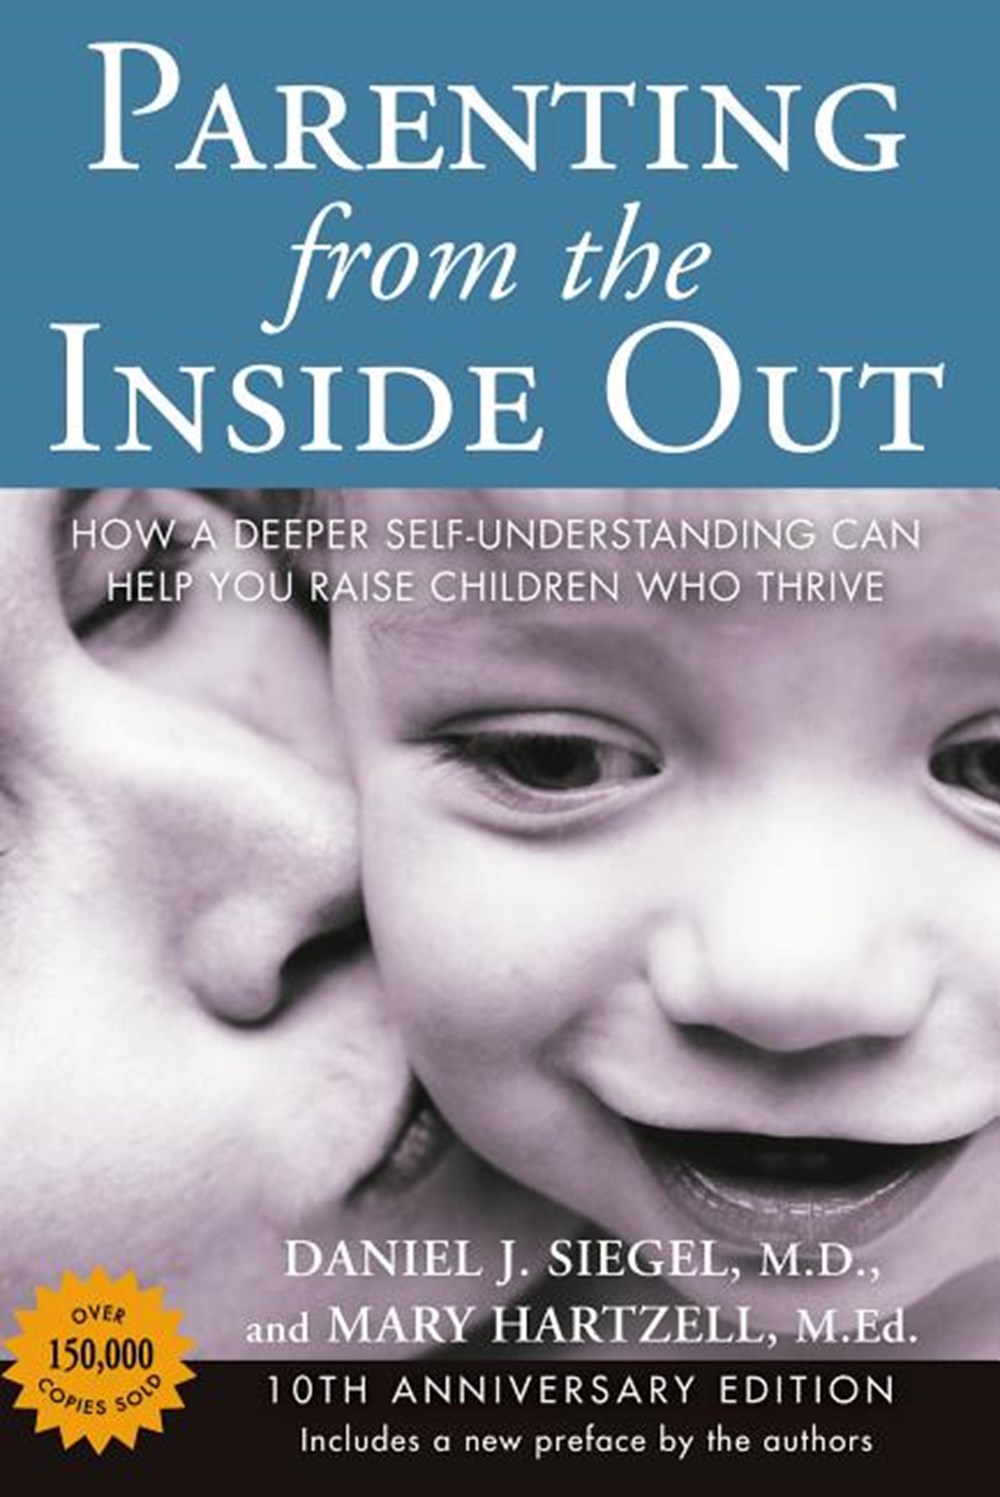 Parenting from the Inside Out: How a Deeper Self-Understanding Can Help You Raise Children Who Thriv